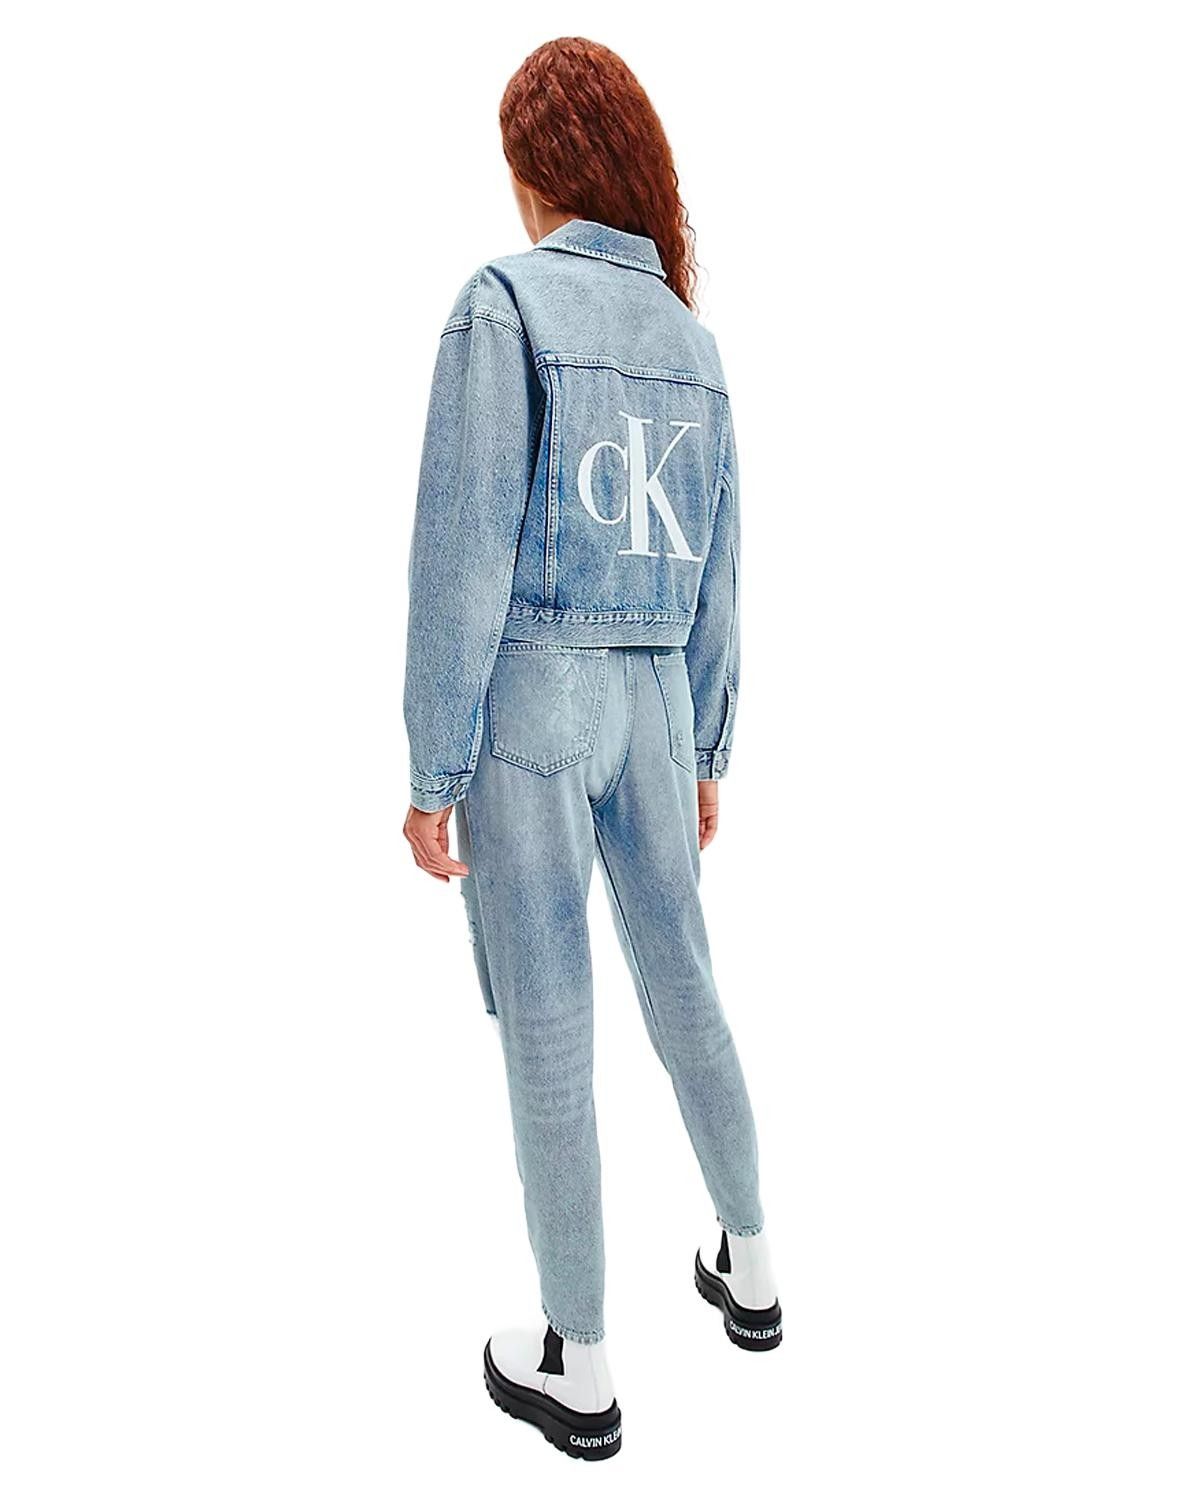 Brand: Calvin Klein Jeans
Gender: Women
Type: Jackets
Season: Spring/Summer

PRODUCT DETAIL
• Color: blue
• Fastening: buttons
• Sleeves: long
• Collar: classic
• Pockets: front pockets

COMPOSITION AND MATERIAL
• Composition: -100% cotton 
•  Washing: machine wash at 30°